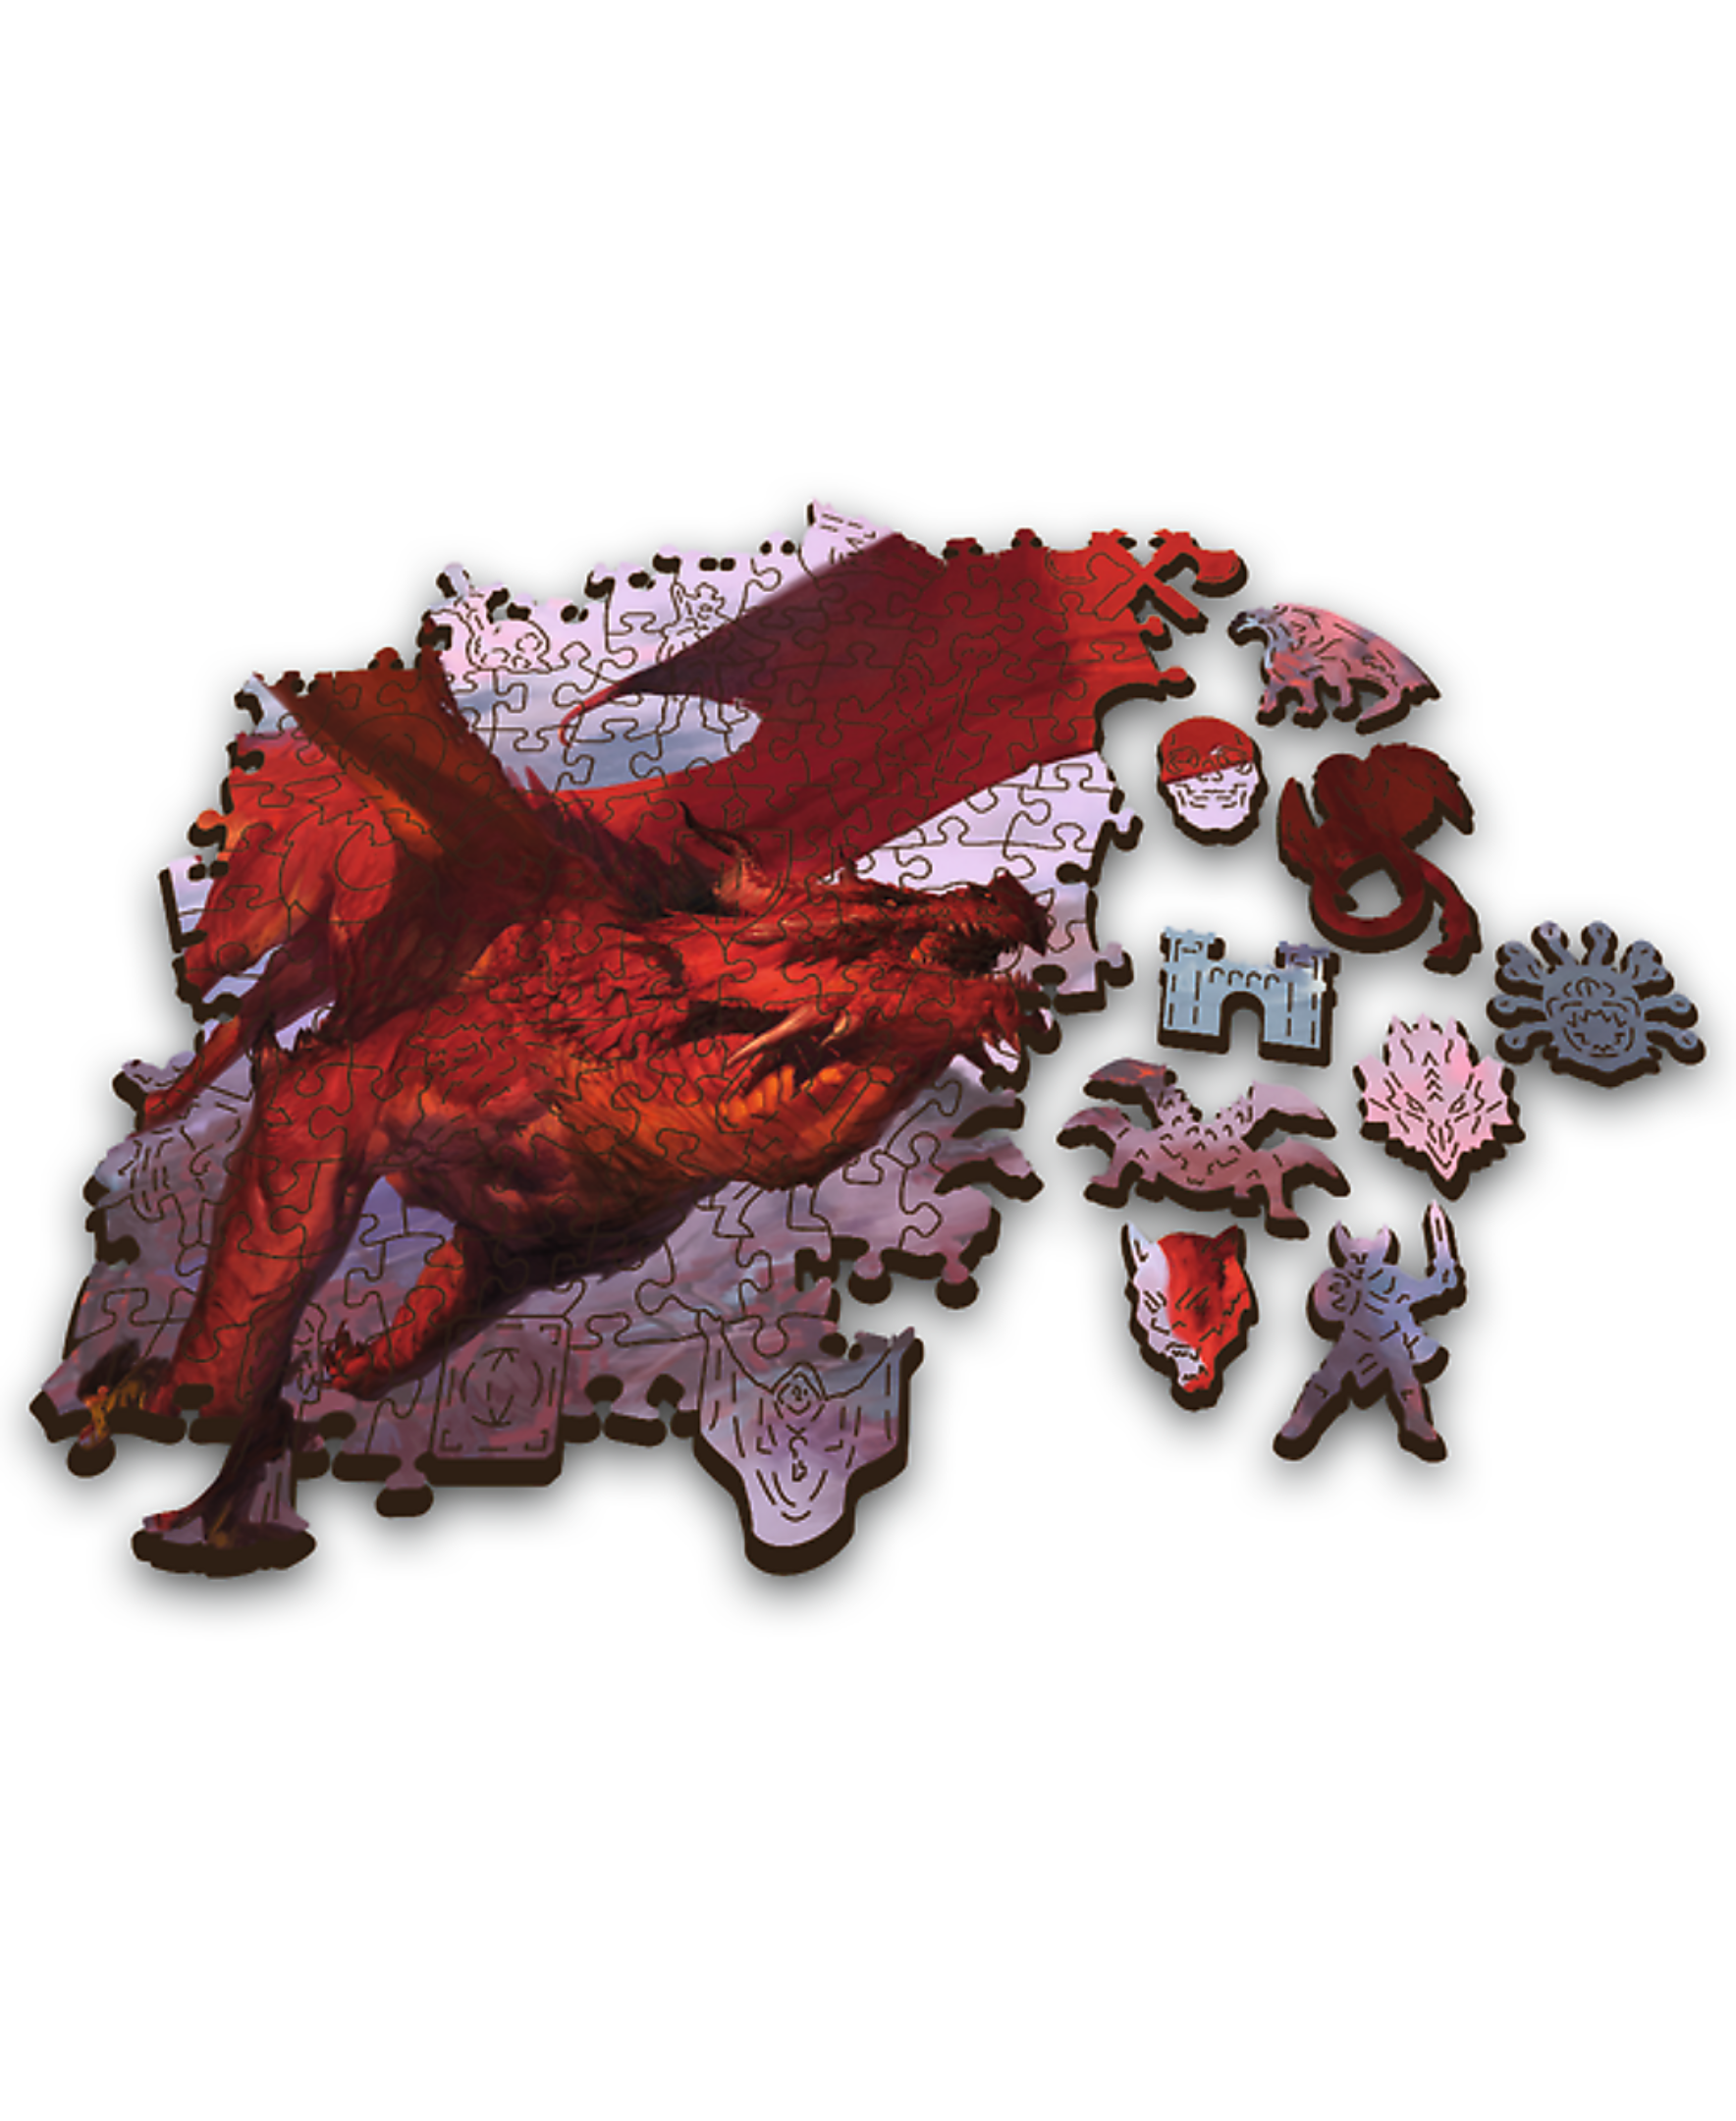 Trefl Wood Craft 501 Piece Wooden Puzzle - Dungeons & Dragons - Ancient Red Dragon